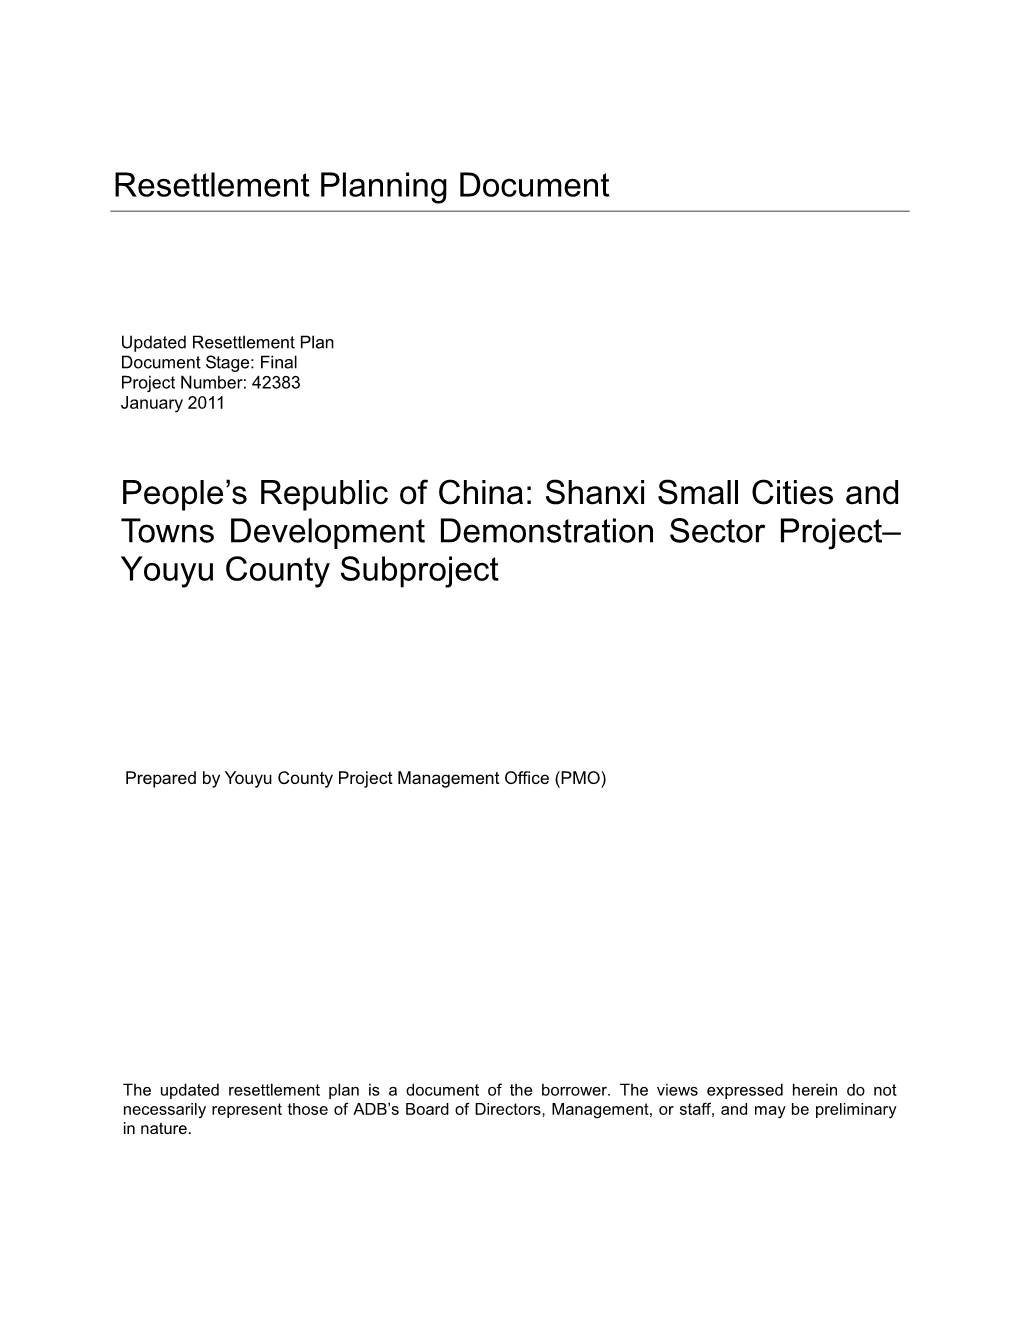 RPD: People's Republic of China: Shanxi Small Cities and Towns